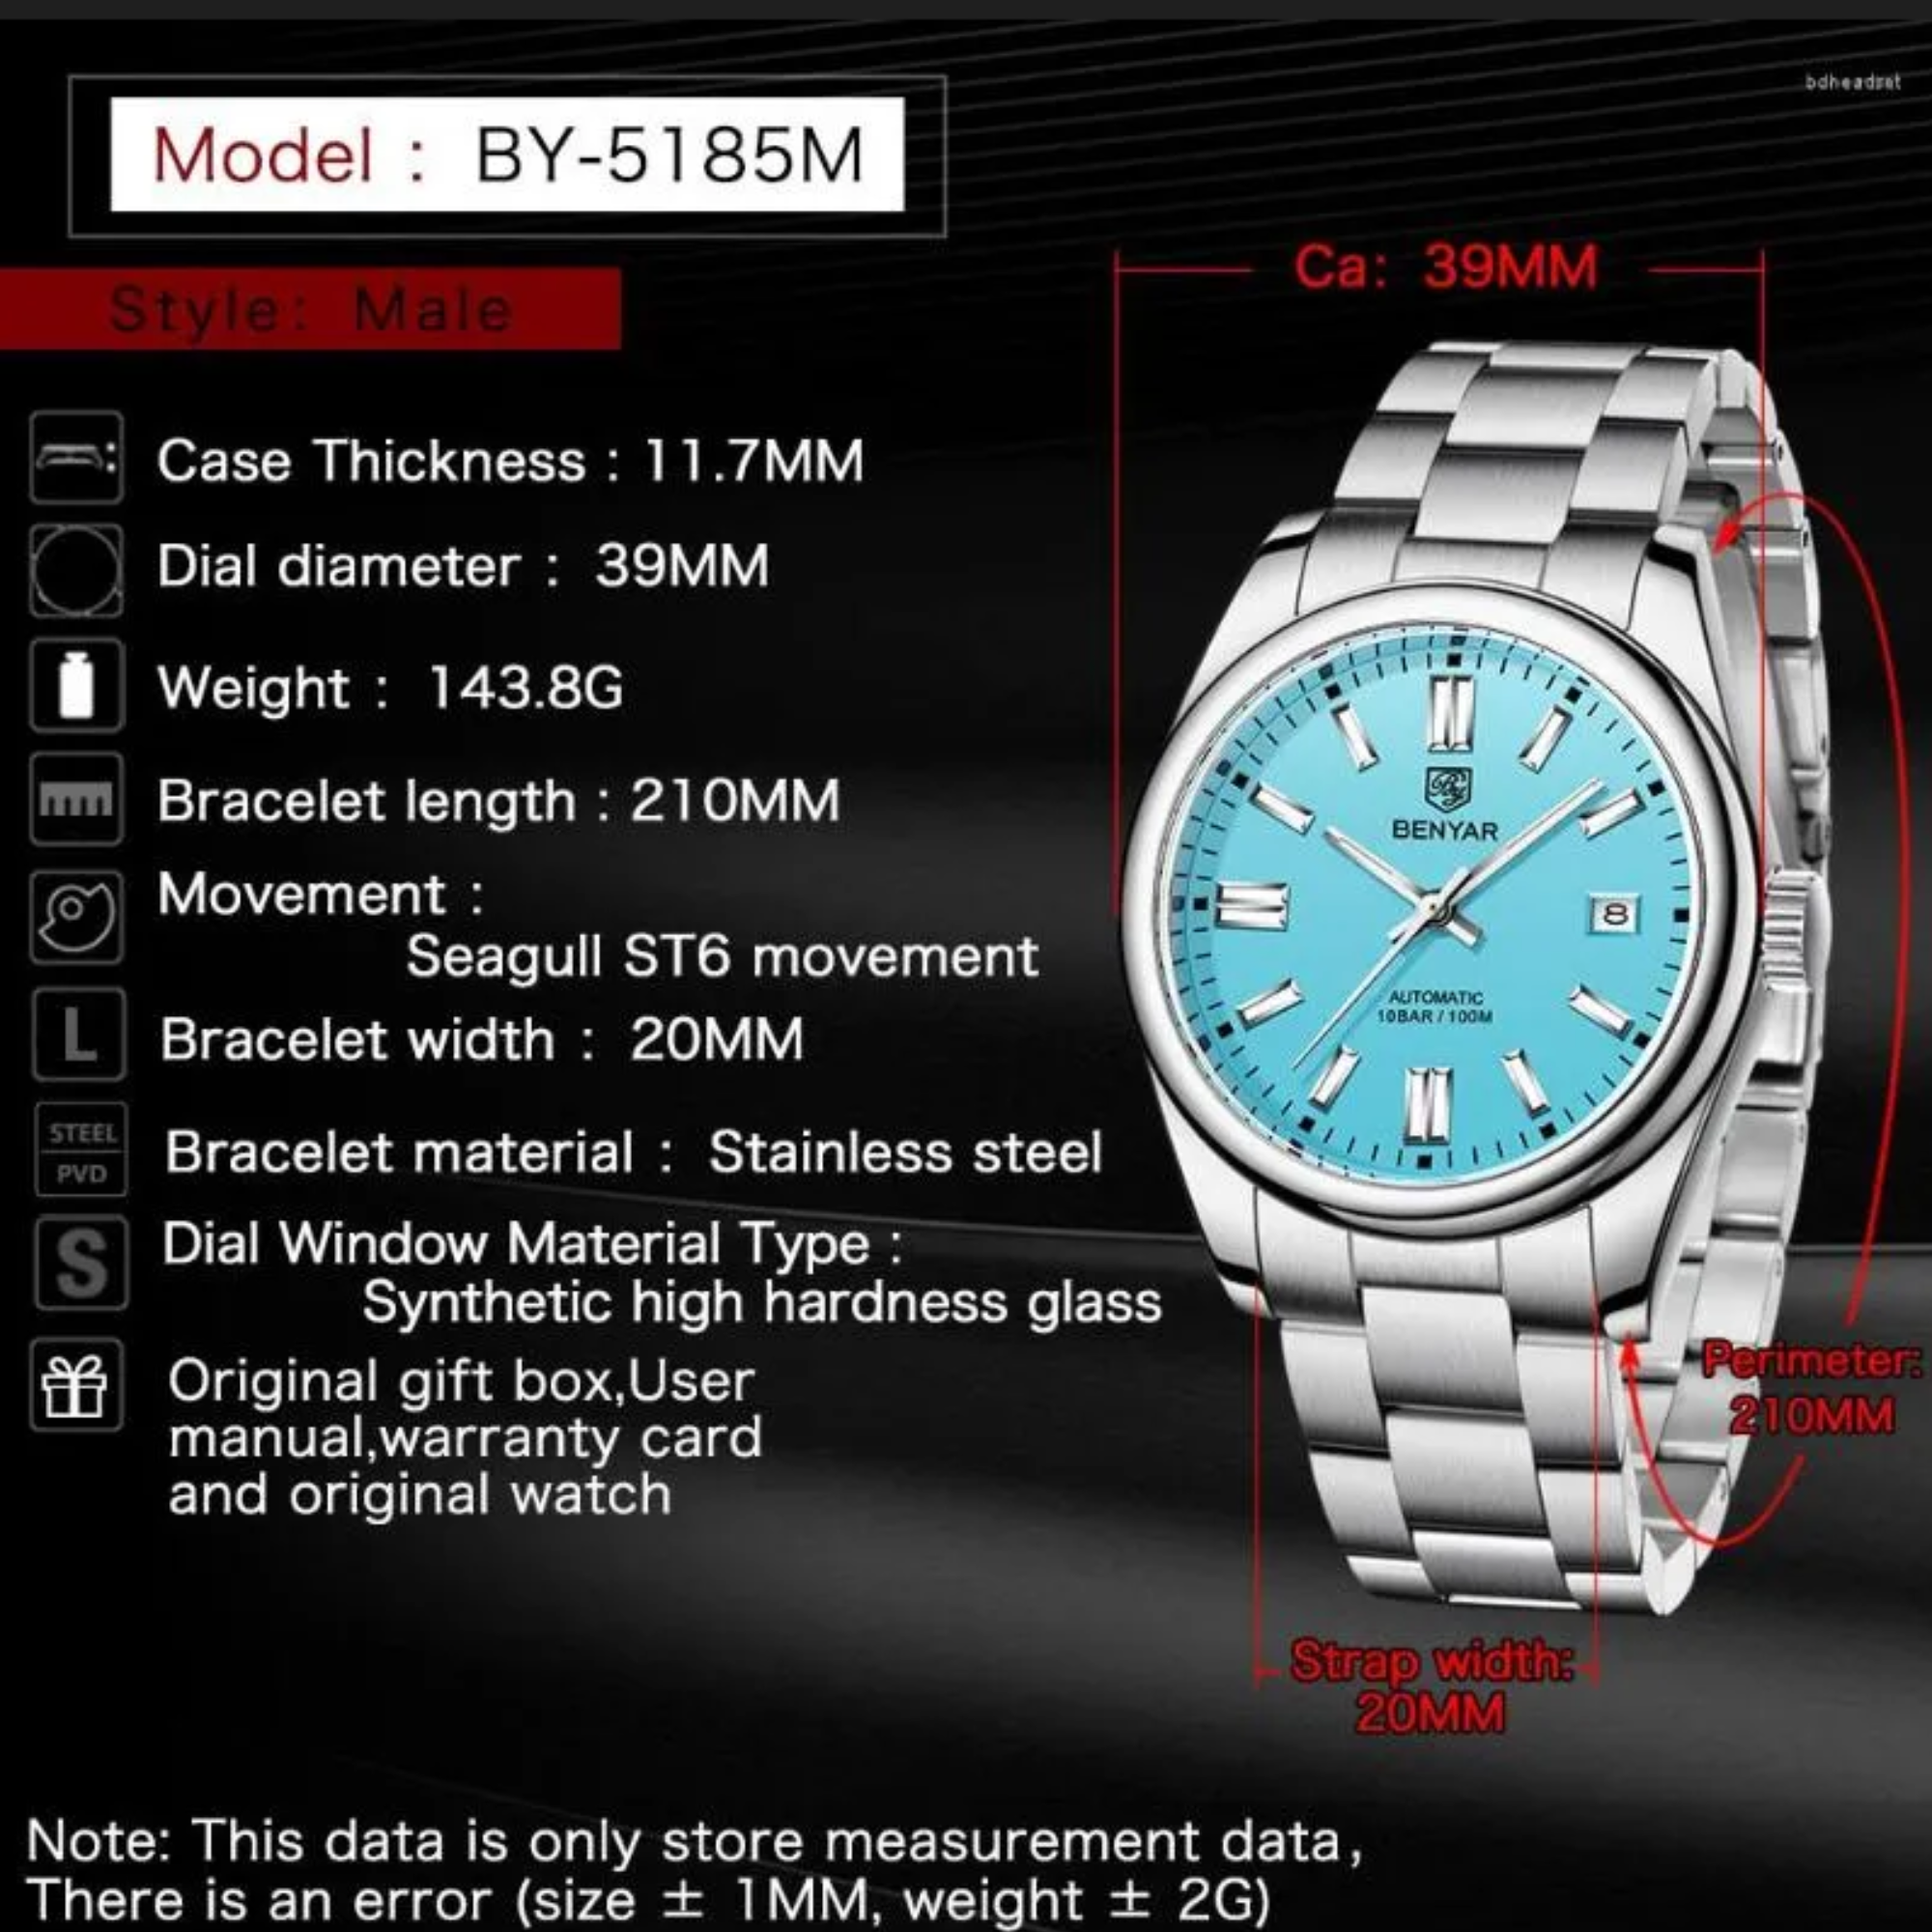 BENYAR Classic Men's Automatic Mechanical Watch Stainless Steel Strap Waterproof Luminous Simple Business Sports Wristwatch - Tiffany Blue Dial benyar watches online india dream watches